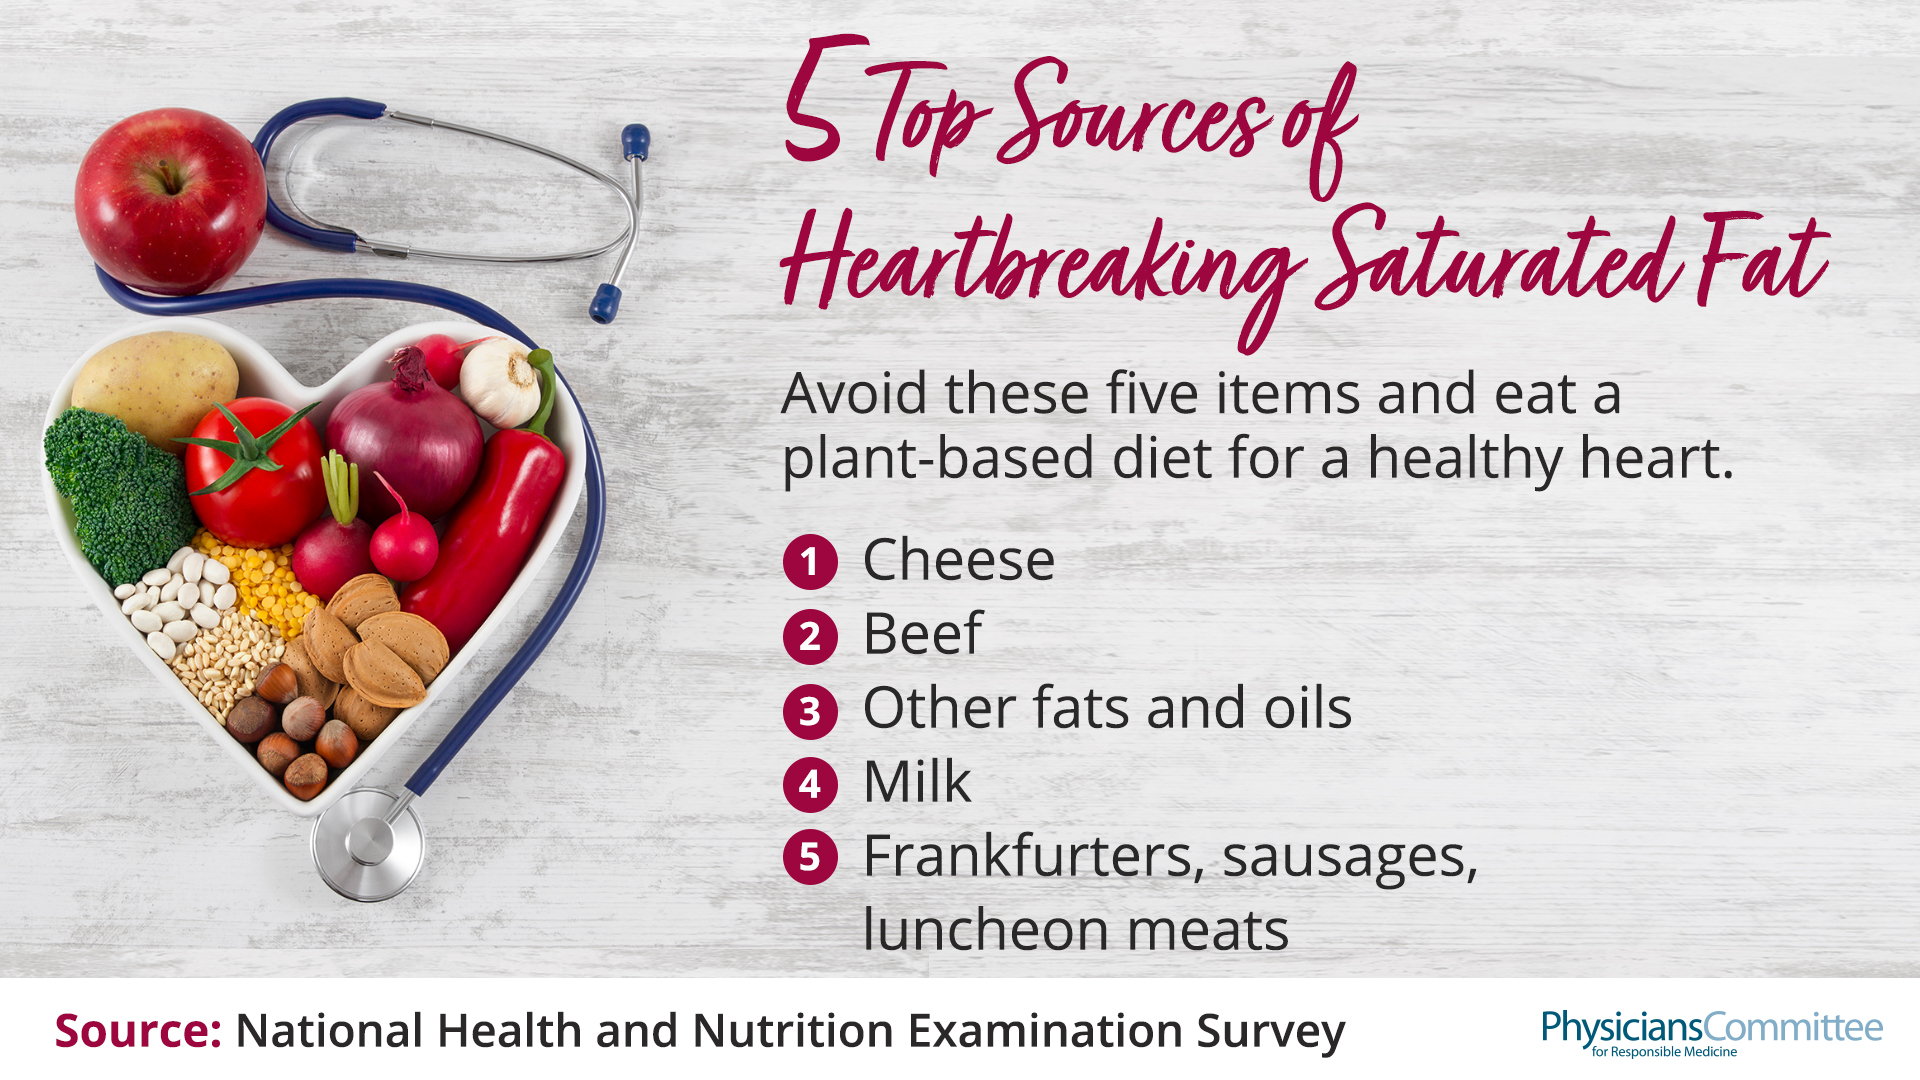 5 Top Sources of Heartbreaking Saturated Fat